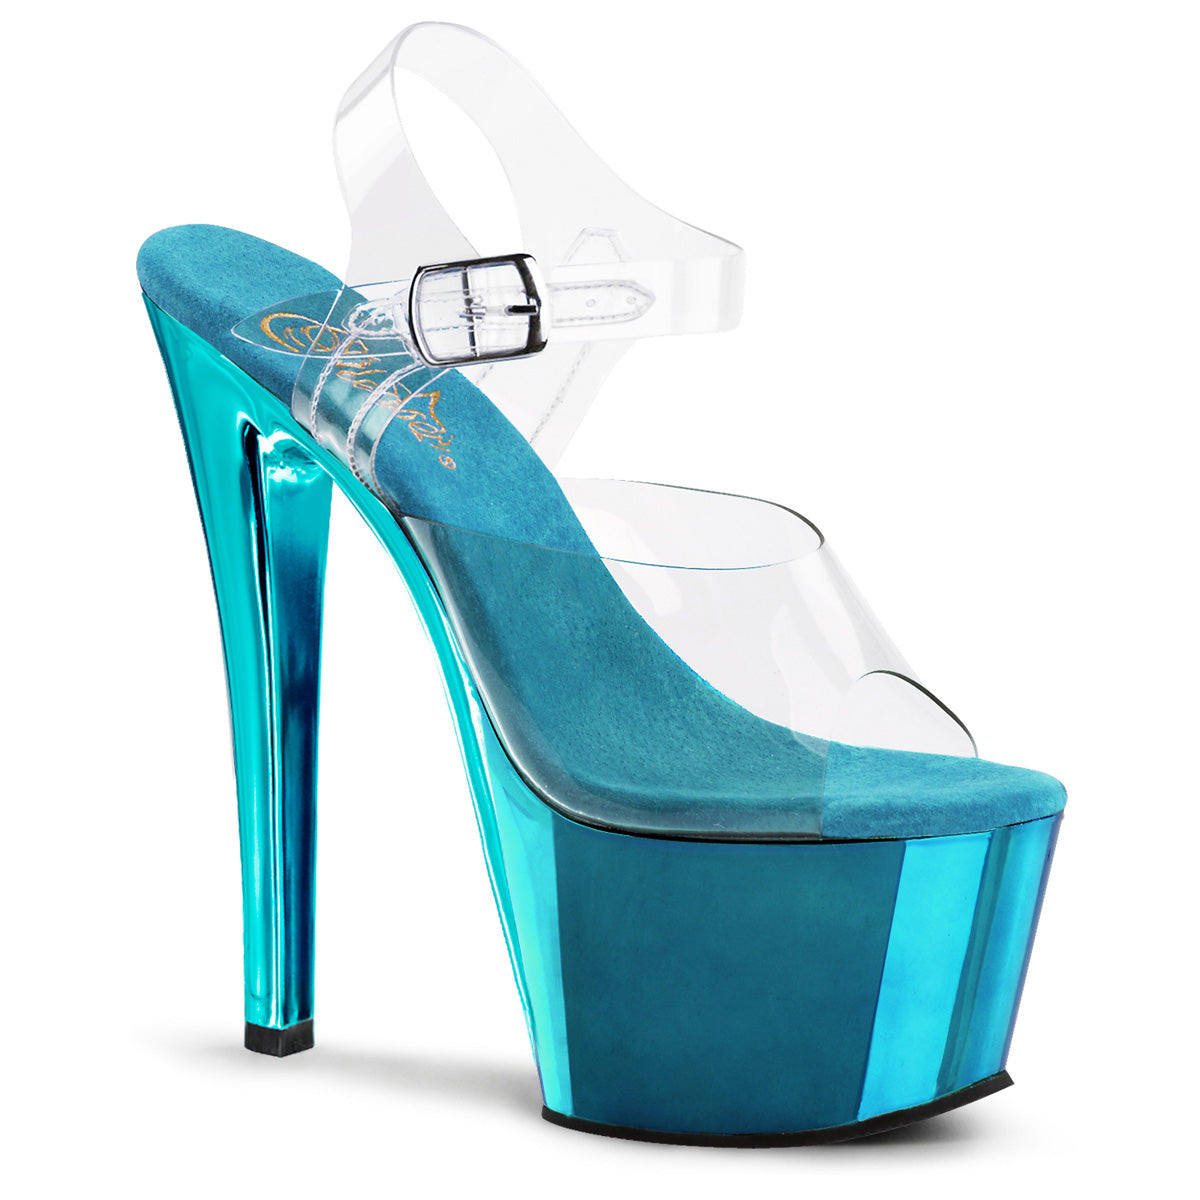 Sky-308 7 "Clear and Turquoise Chrome Pole Dancer-platforms